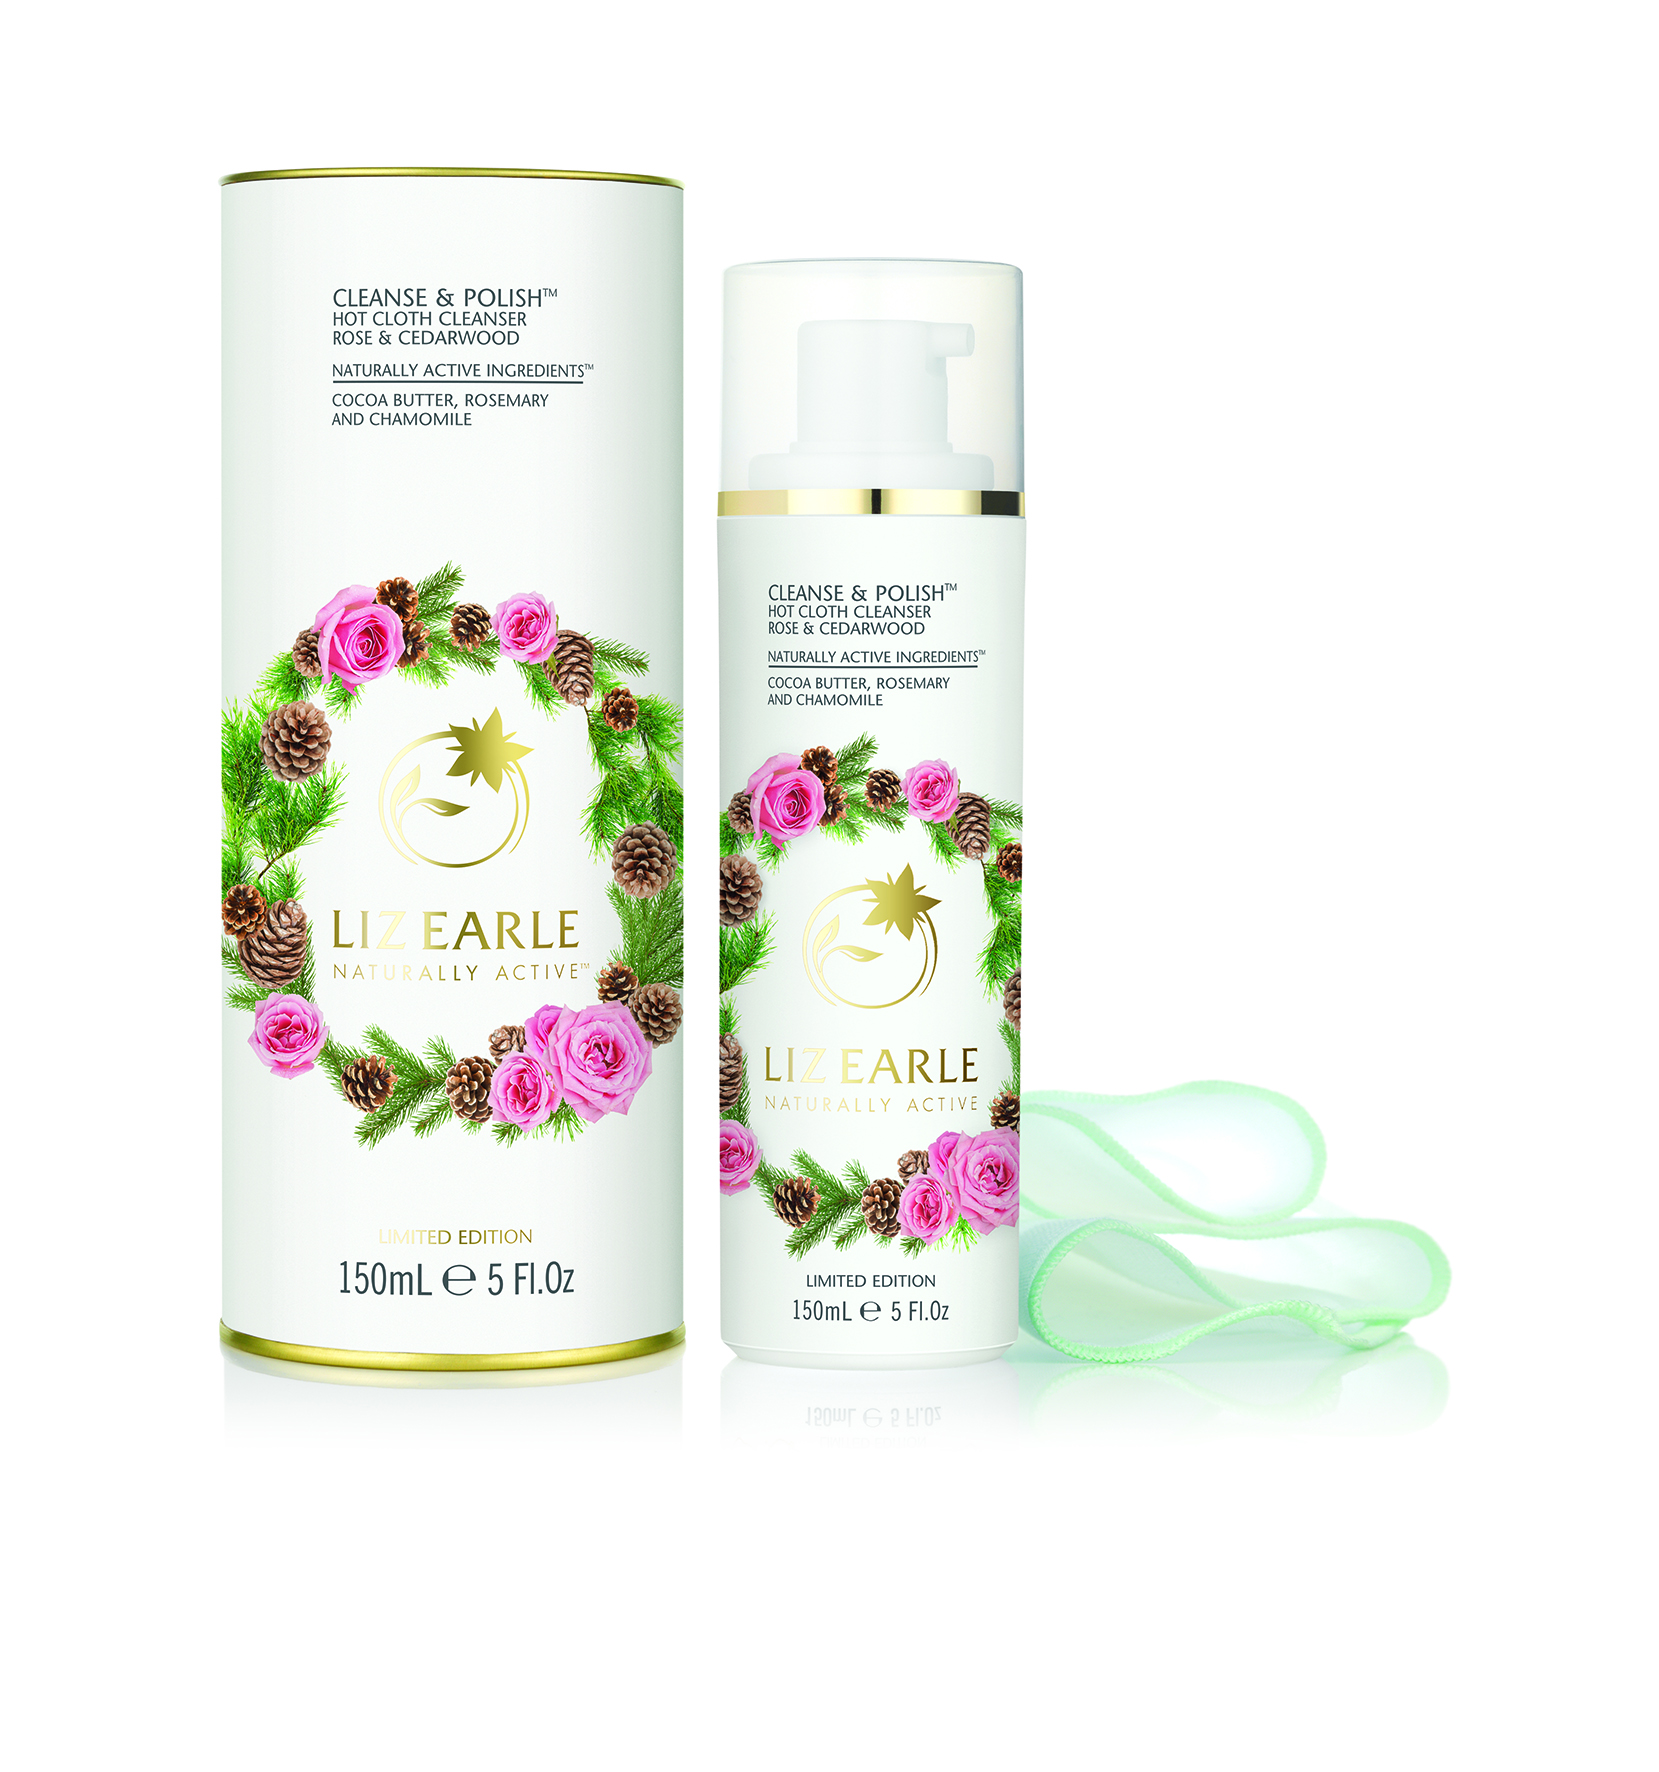 www.lifeandsoullifestyle.com - 20 beauty & Skincare gifts that will blow away beauty lovers